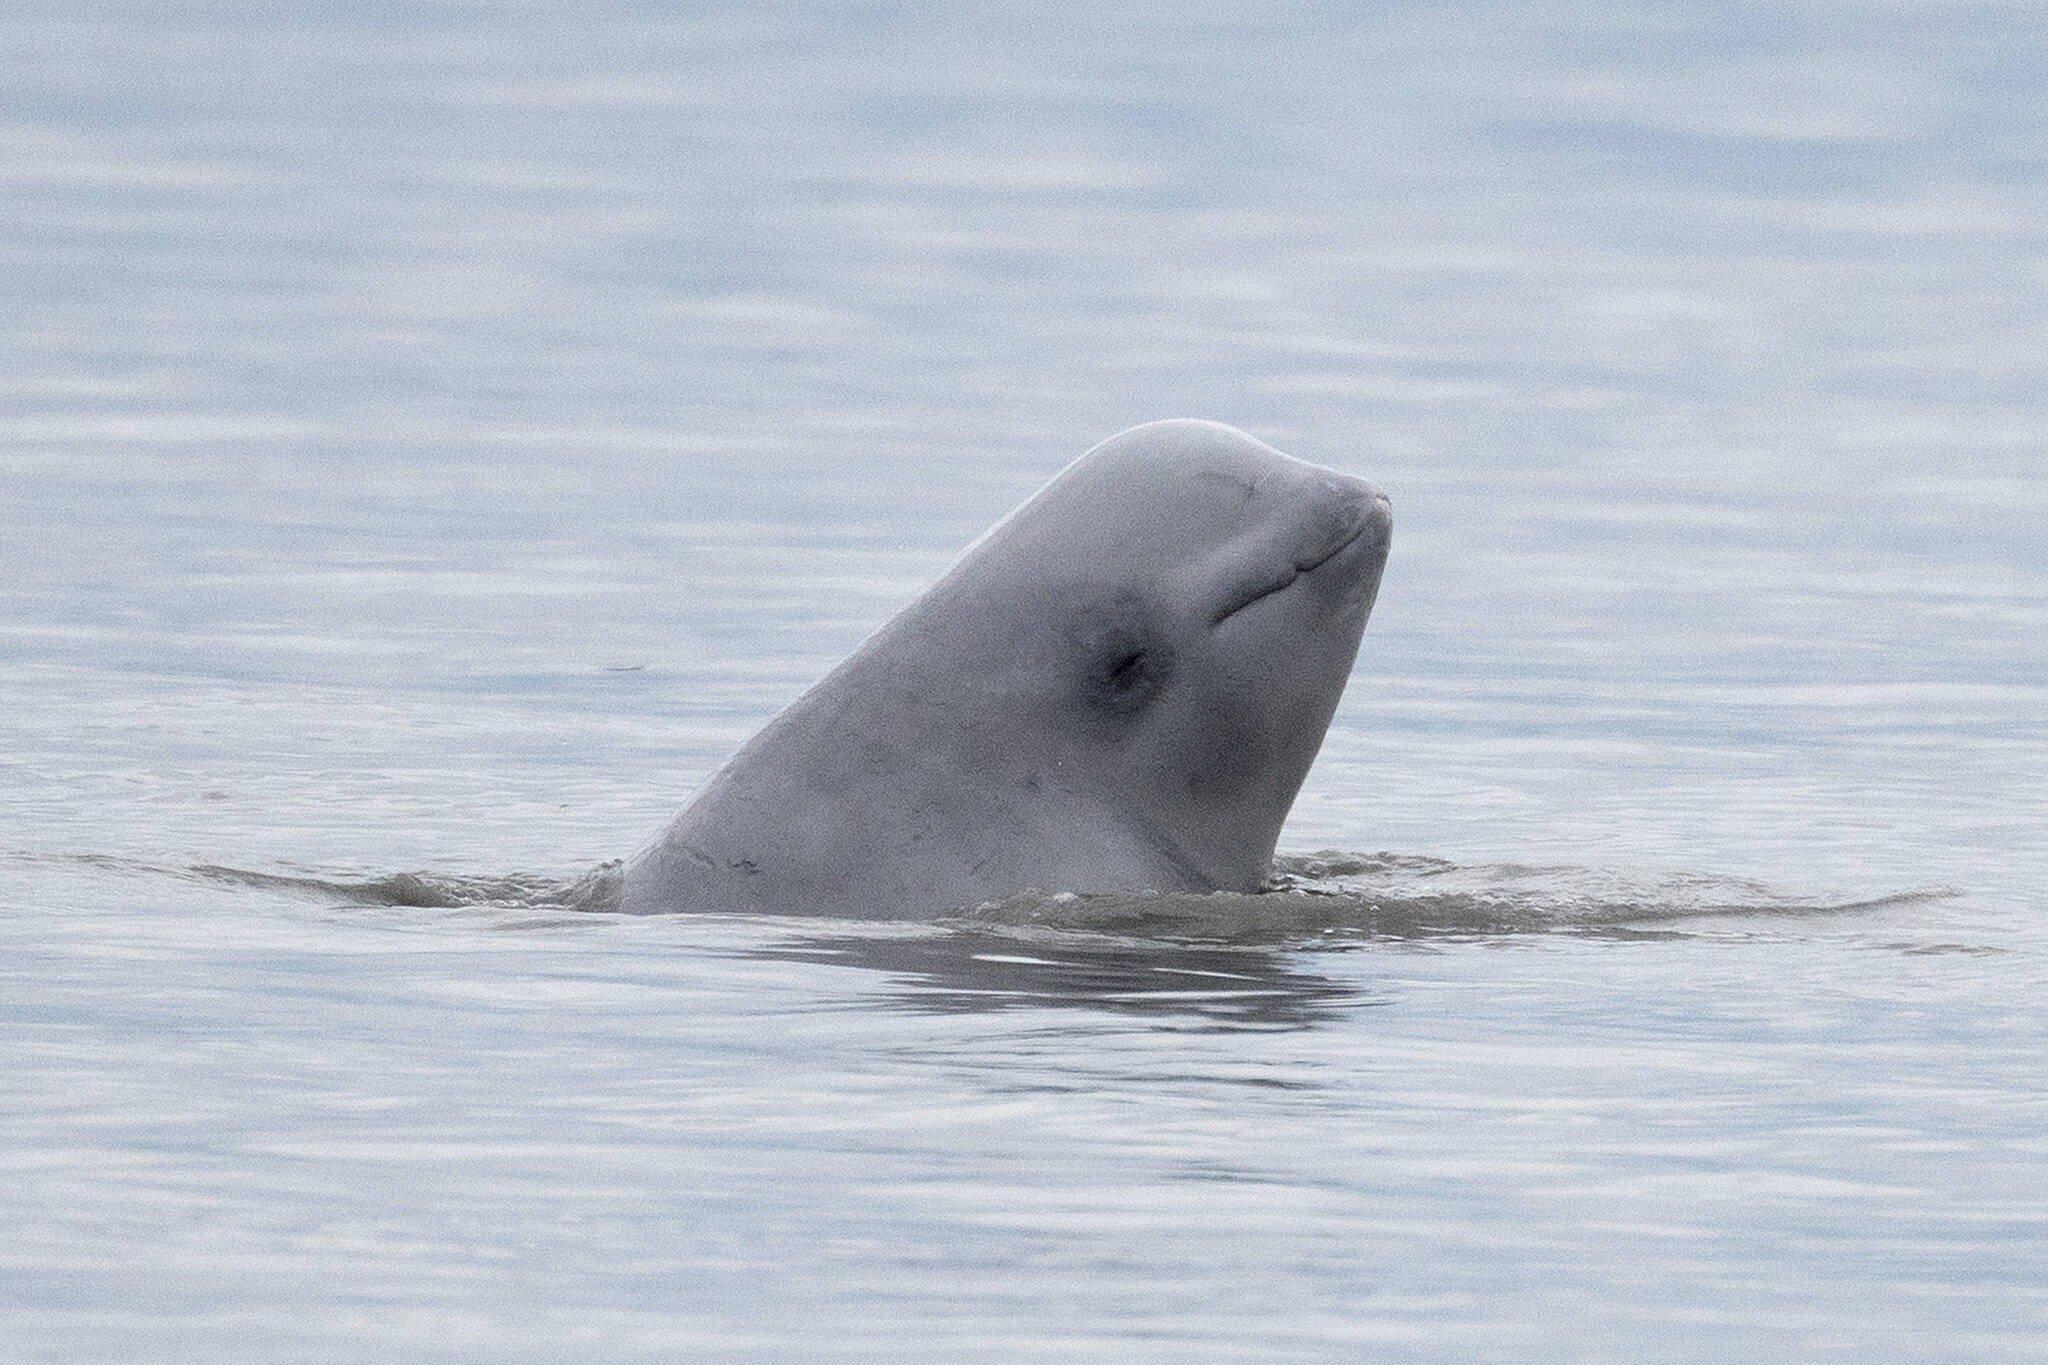 In this Aug. 25, 2017, file photo, provided by NOAA Fisheries, a newborn beluga whale calf sticks its head out of the water in upper Cook Inlet, Alaska. (NOAA Fisheries via AP, File)